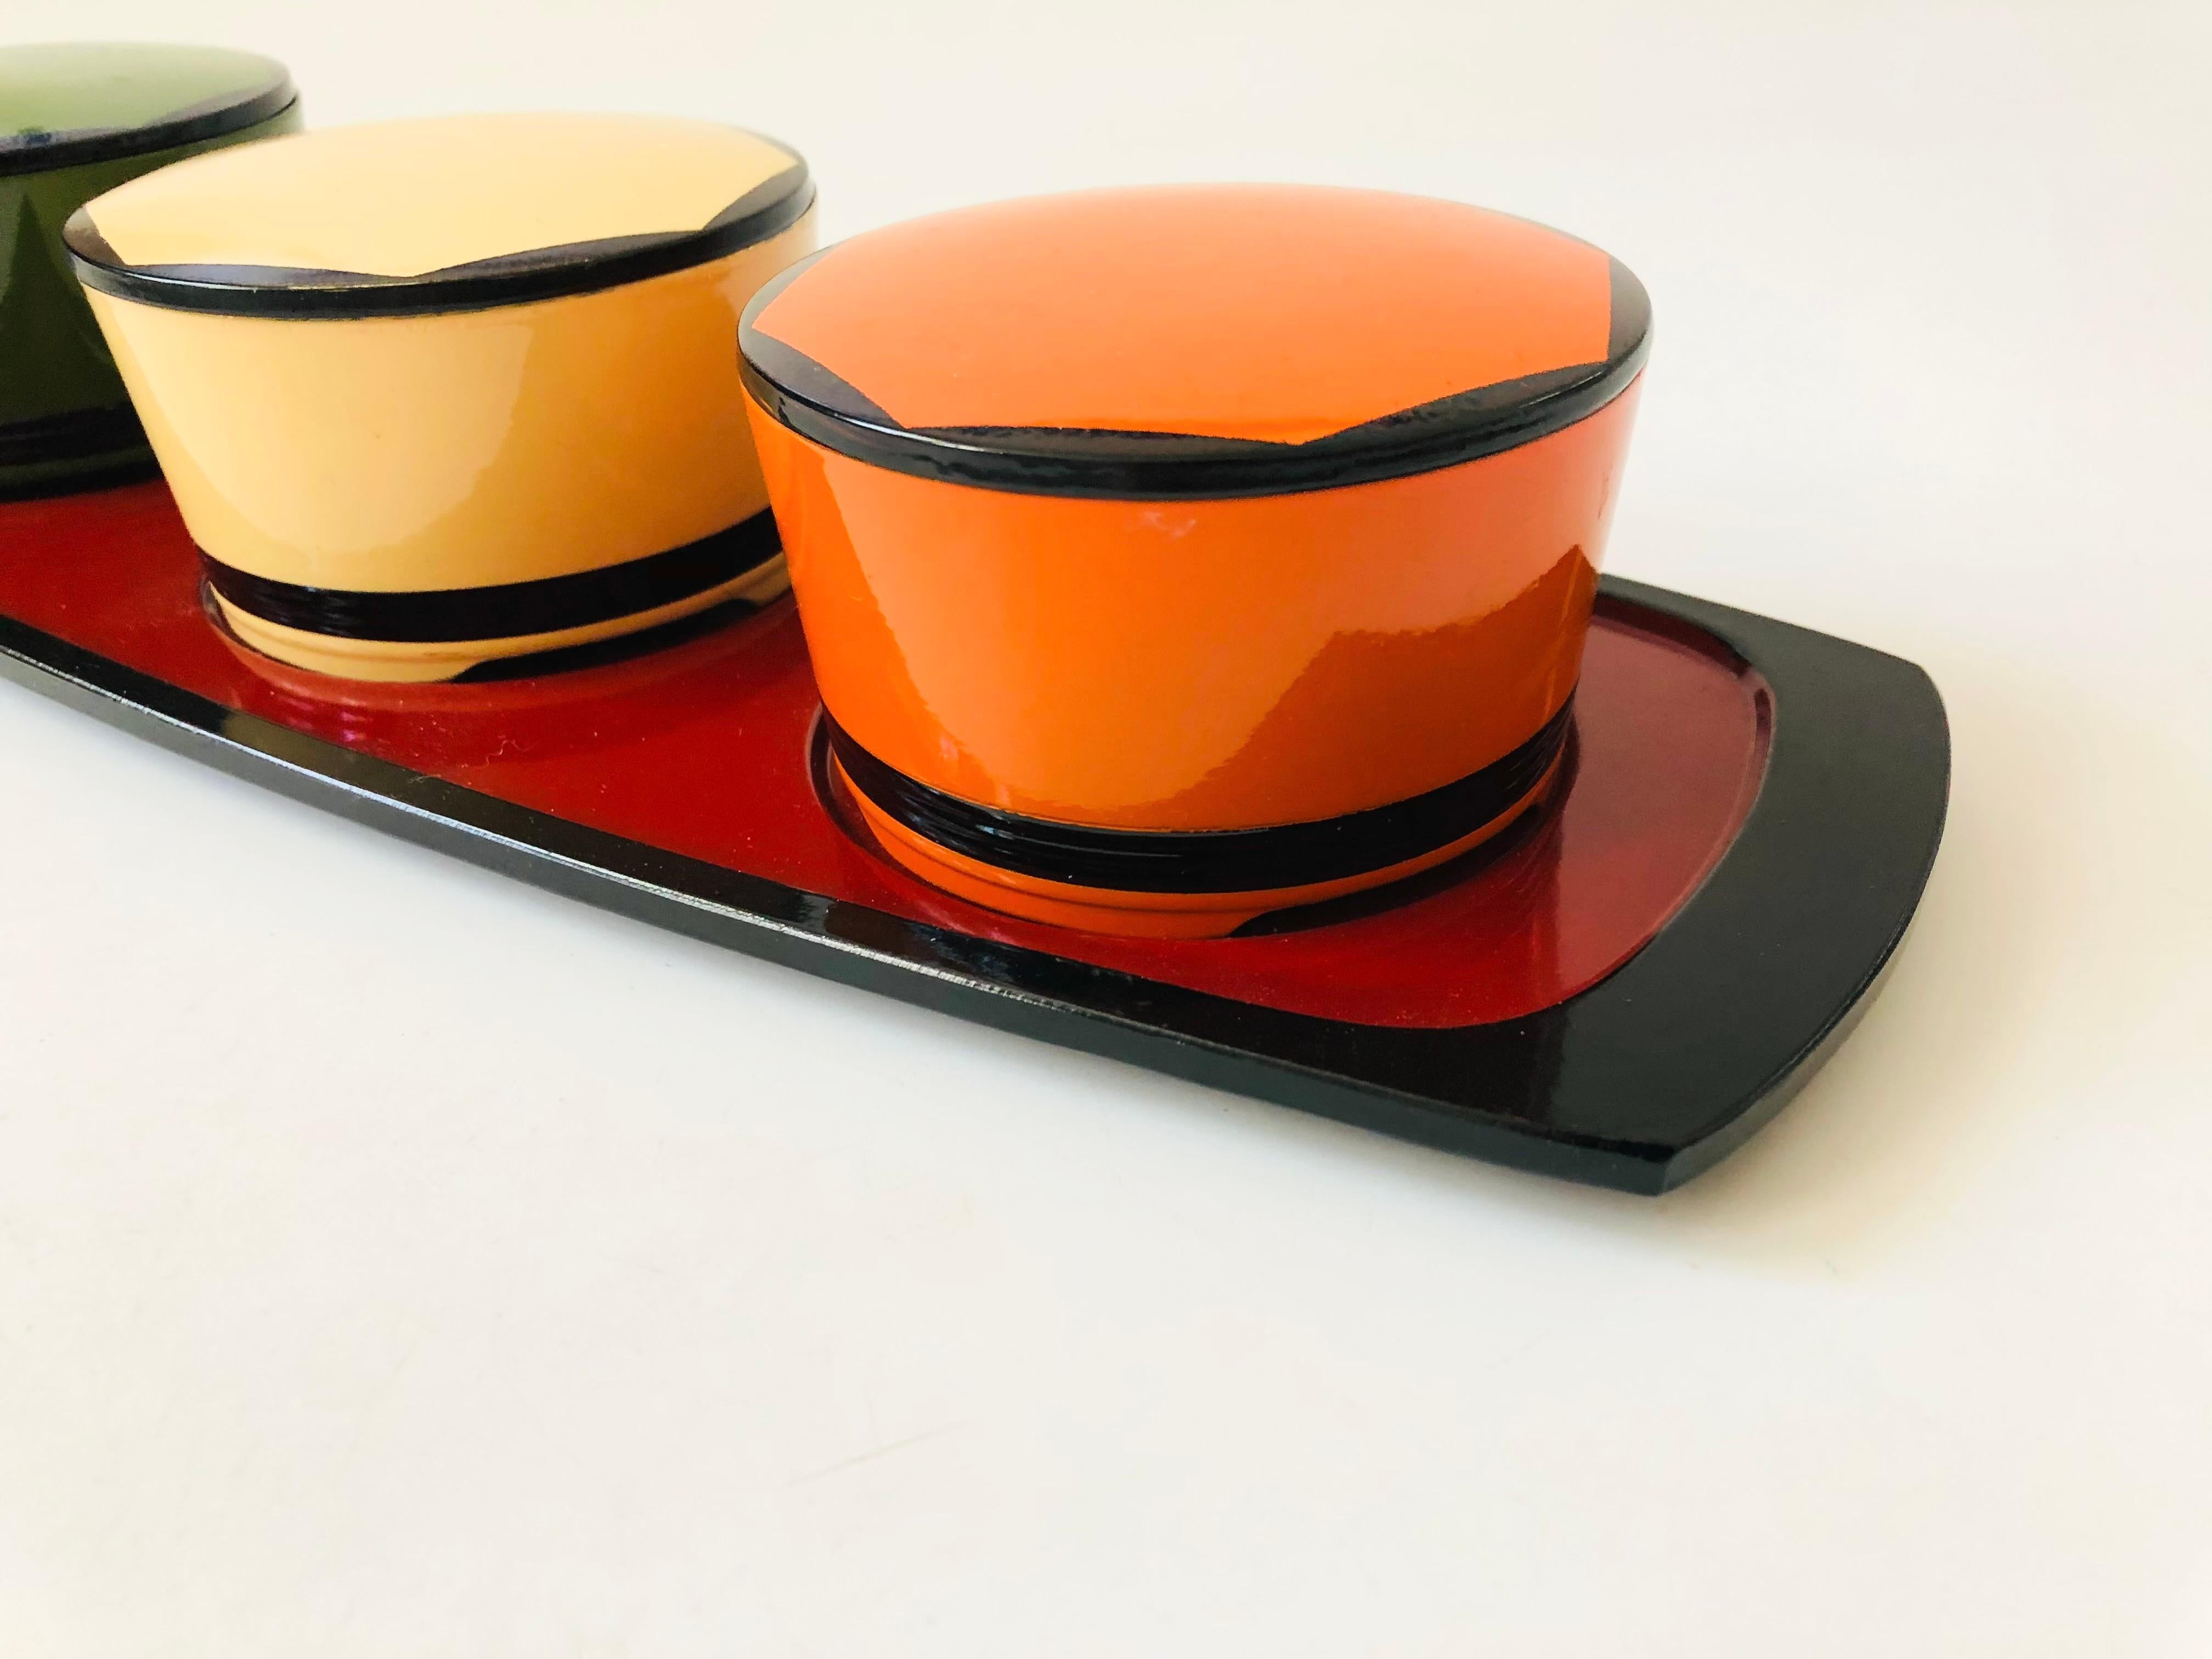 Set of 3 Colorful Japanese Lacquerware Boxes on Tray In Good Condition For Sale In Vallejo, CA